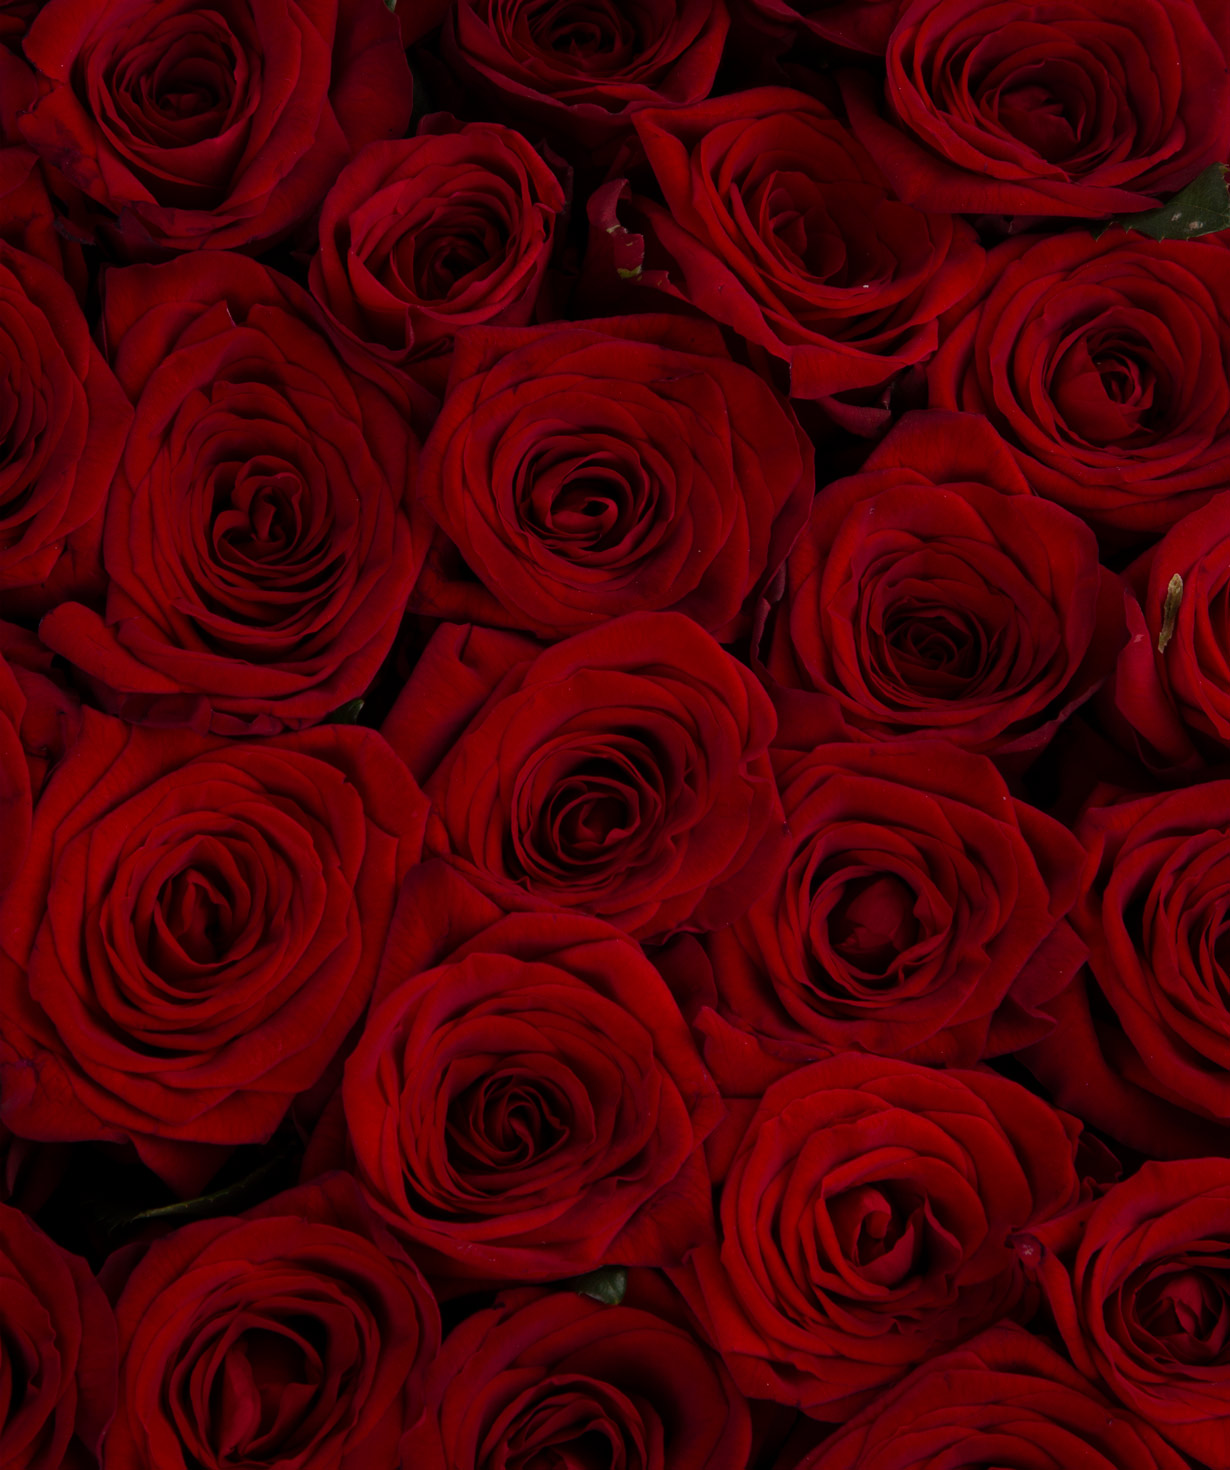 Composition ''Roghudi'' with red roses